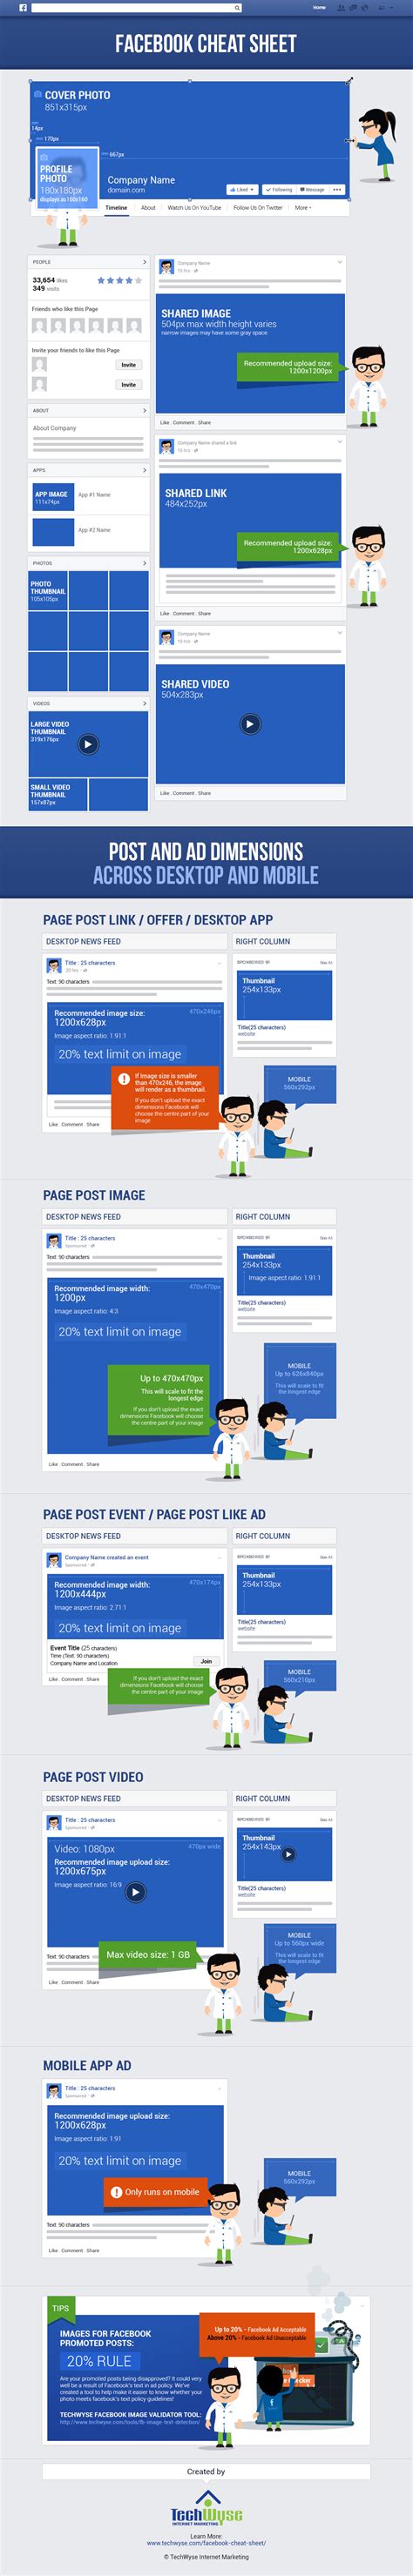 Facebook Cheat Sheet Image Sizes And Dimensions Updated April 2014